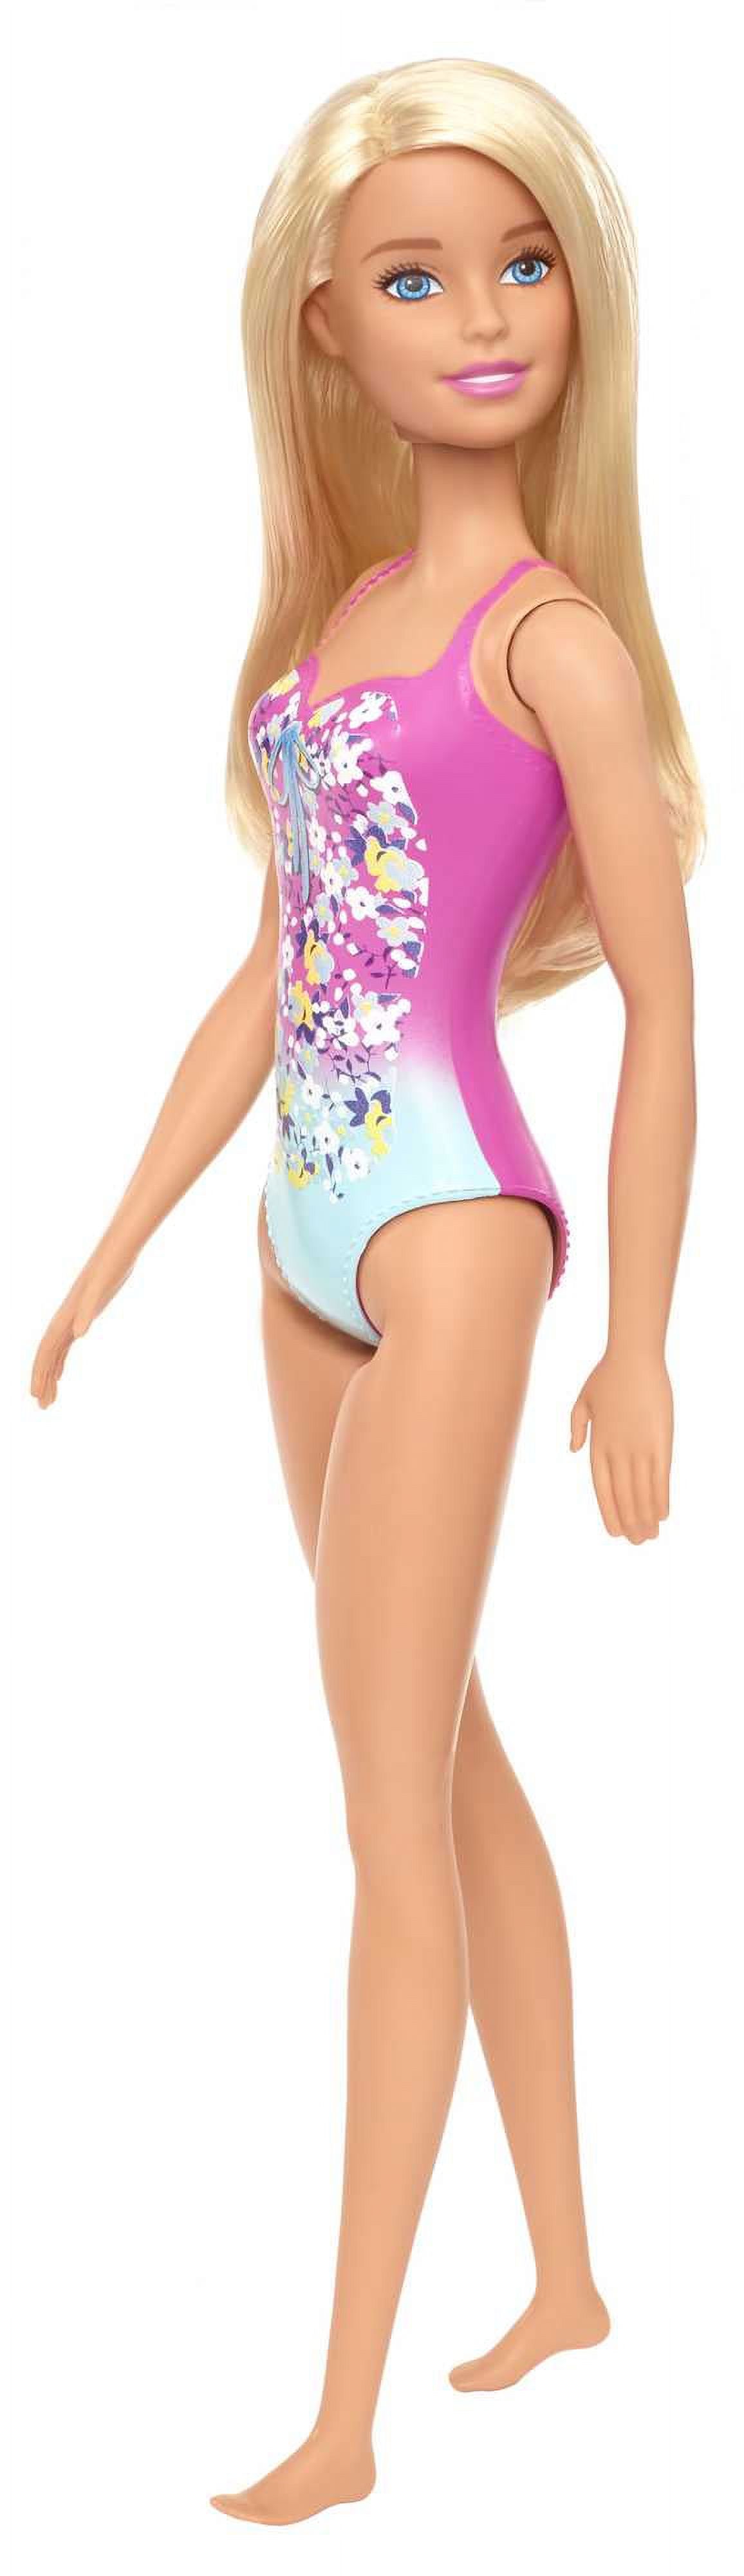 Barbie Swimsuit Beach Doll with Blonde Hair & Pink Floral Print Suit - image 4 of 6